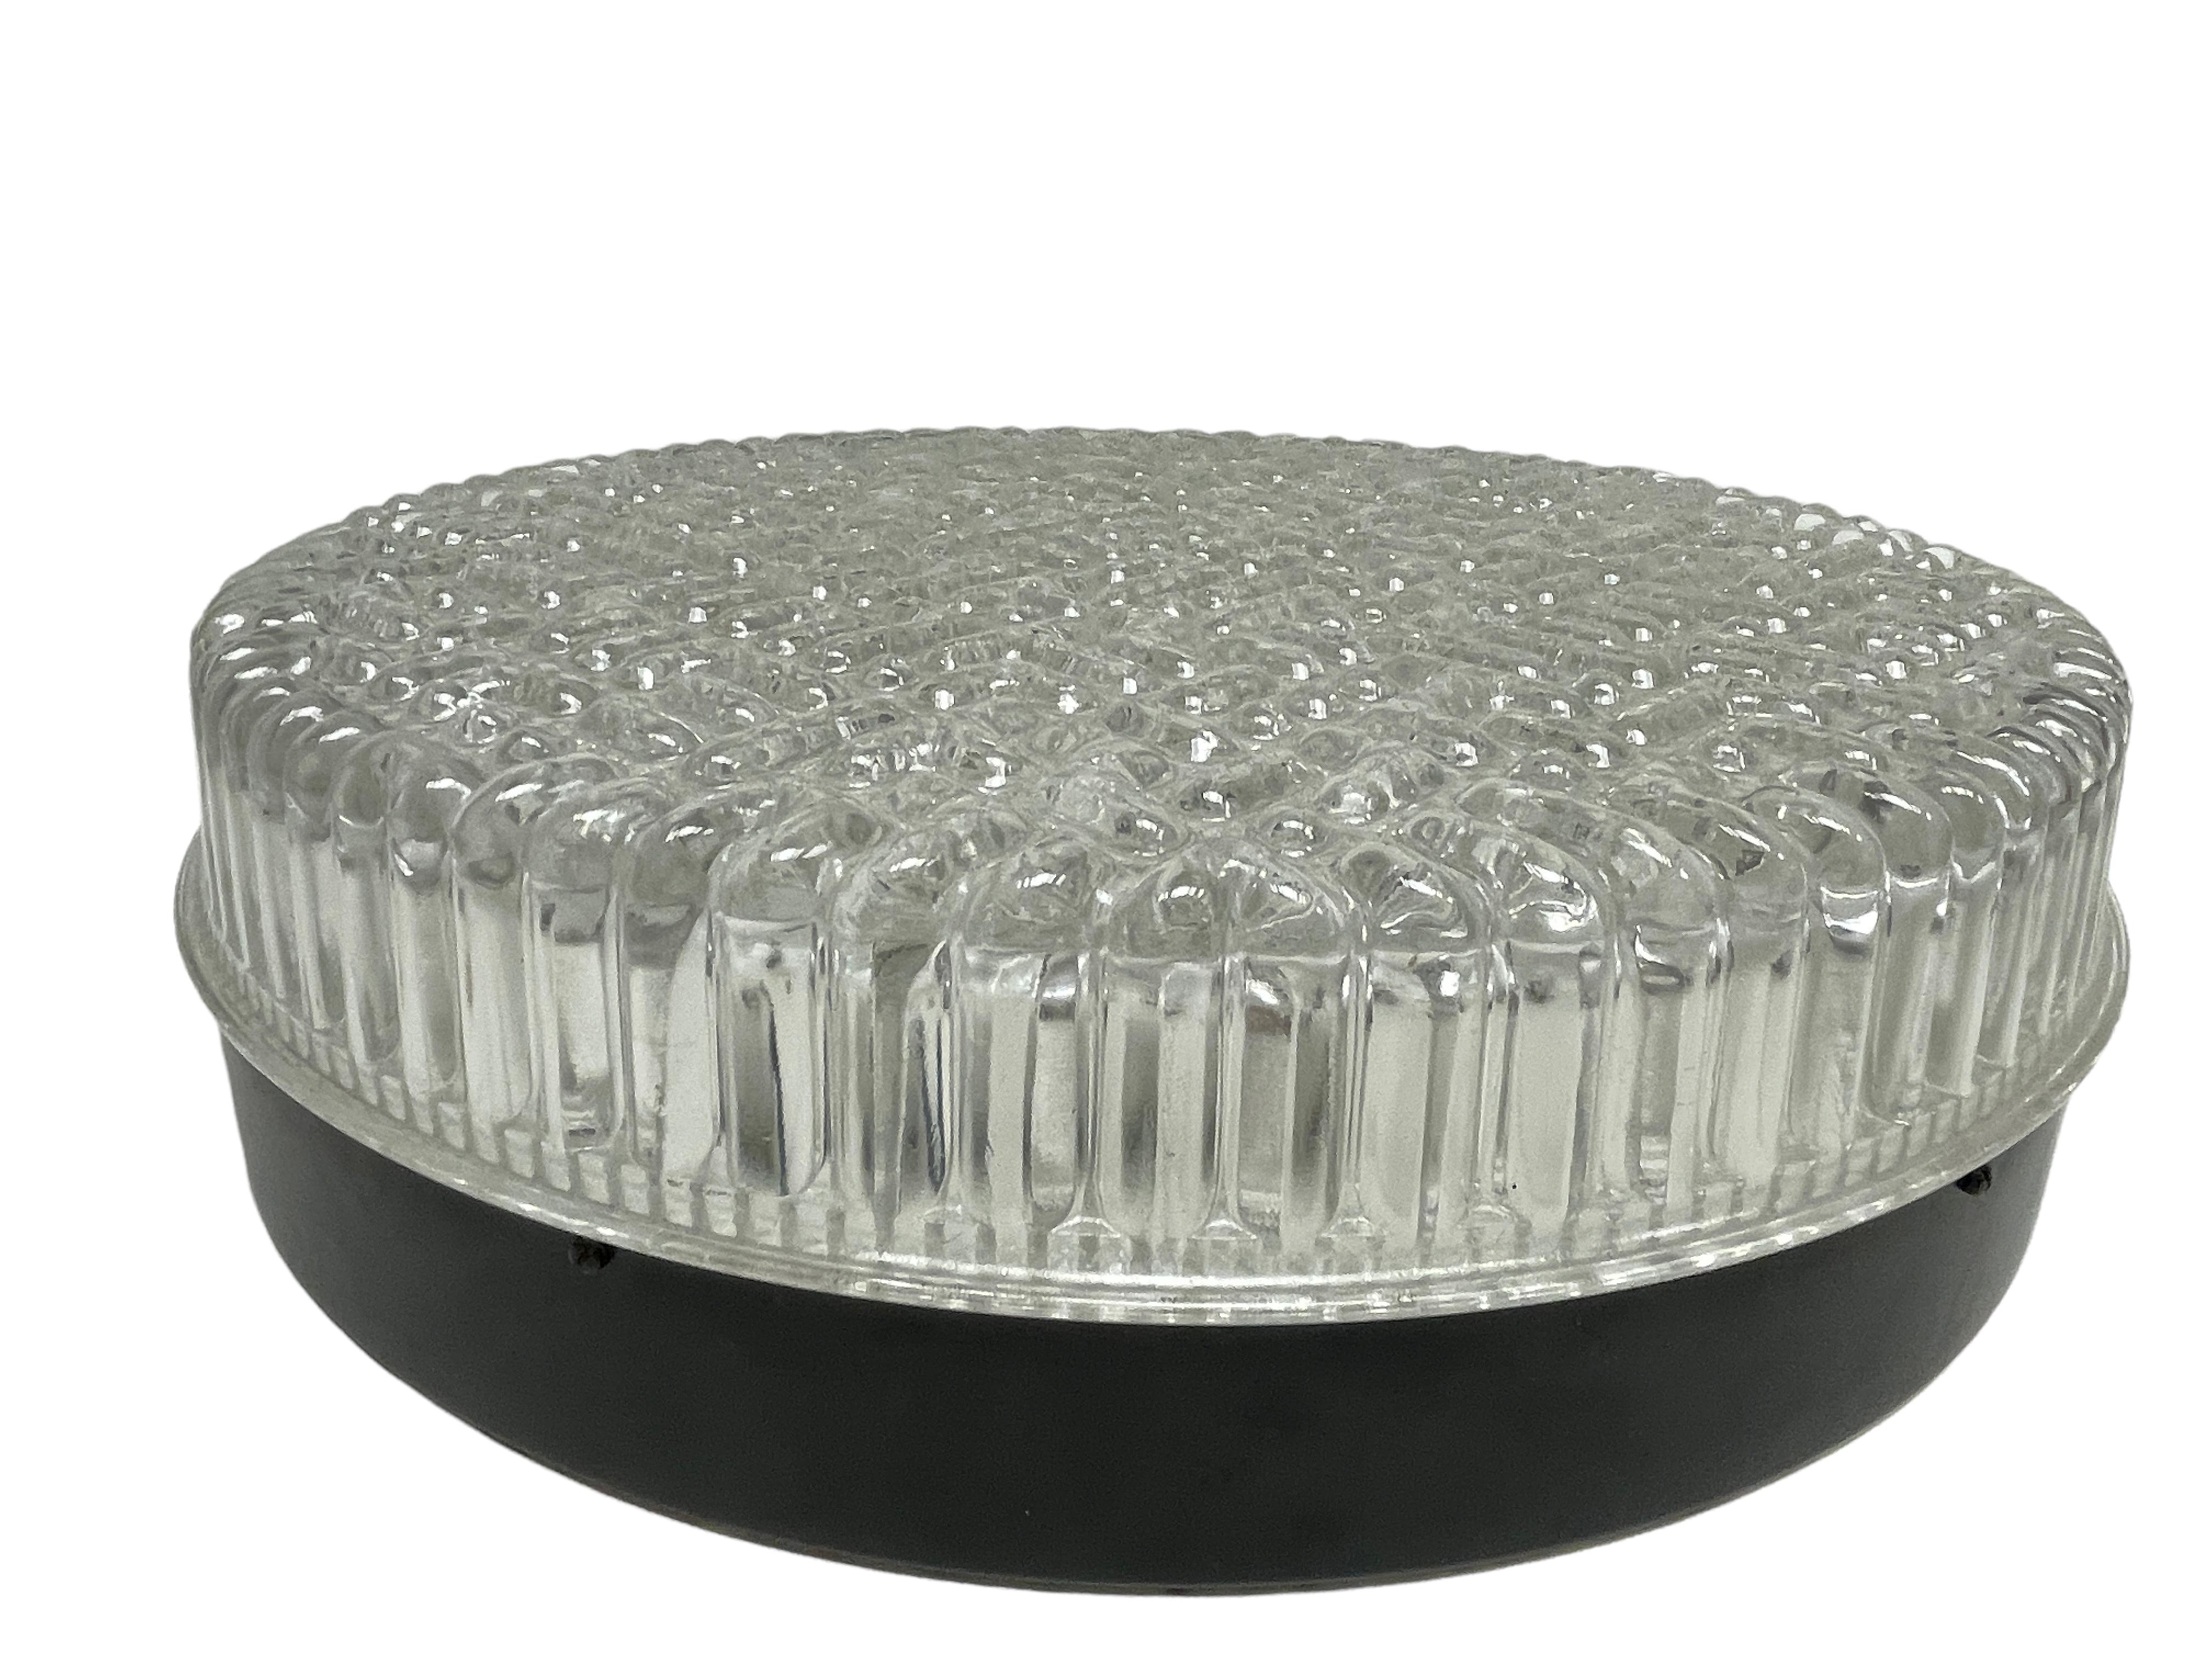 A beautiful flush mount ceiling light. Made in Germany by Glashütte Limburg. Gorgeous textured glass flush mount with metal fixture. The glass has a very heavy glass with a bubble design. The fixture requires three European E27 / 110 Volt Edison